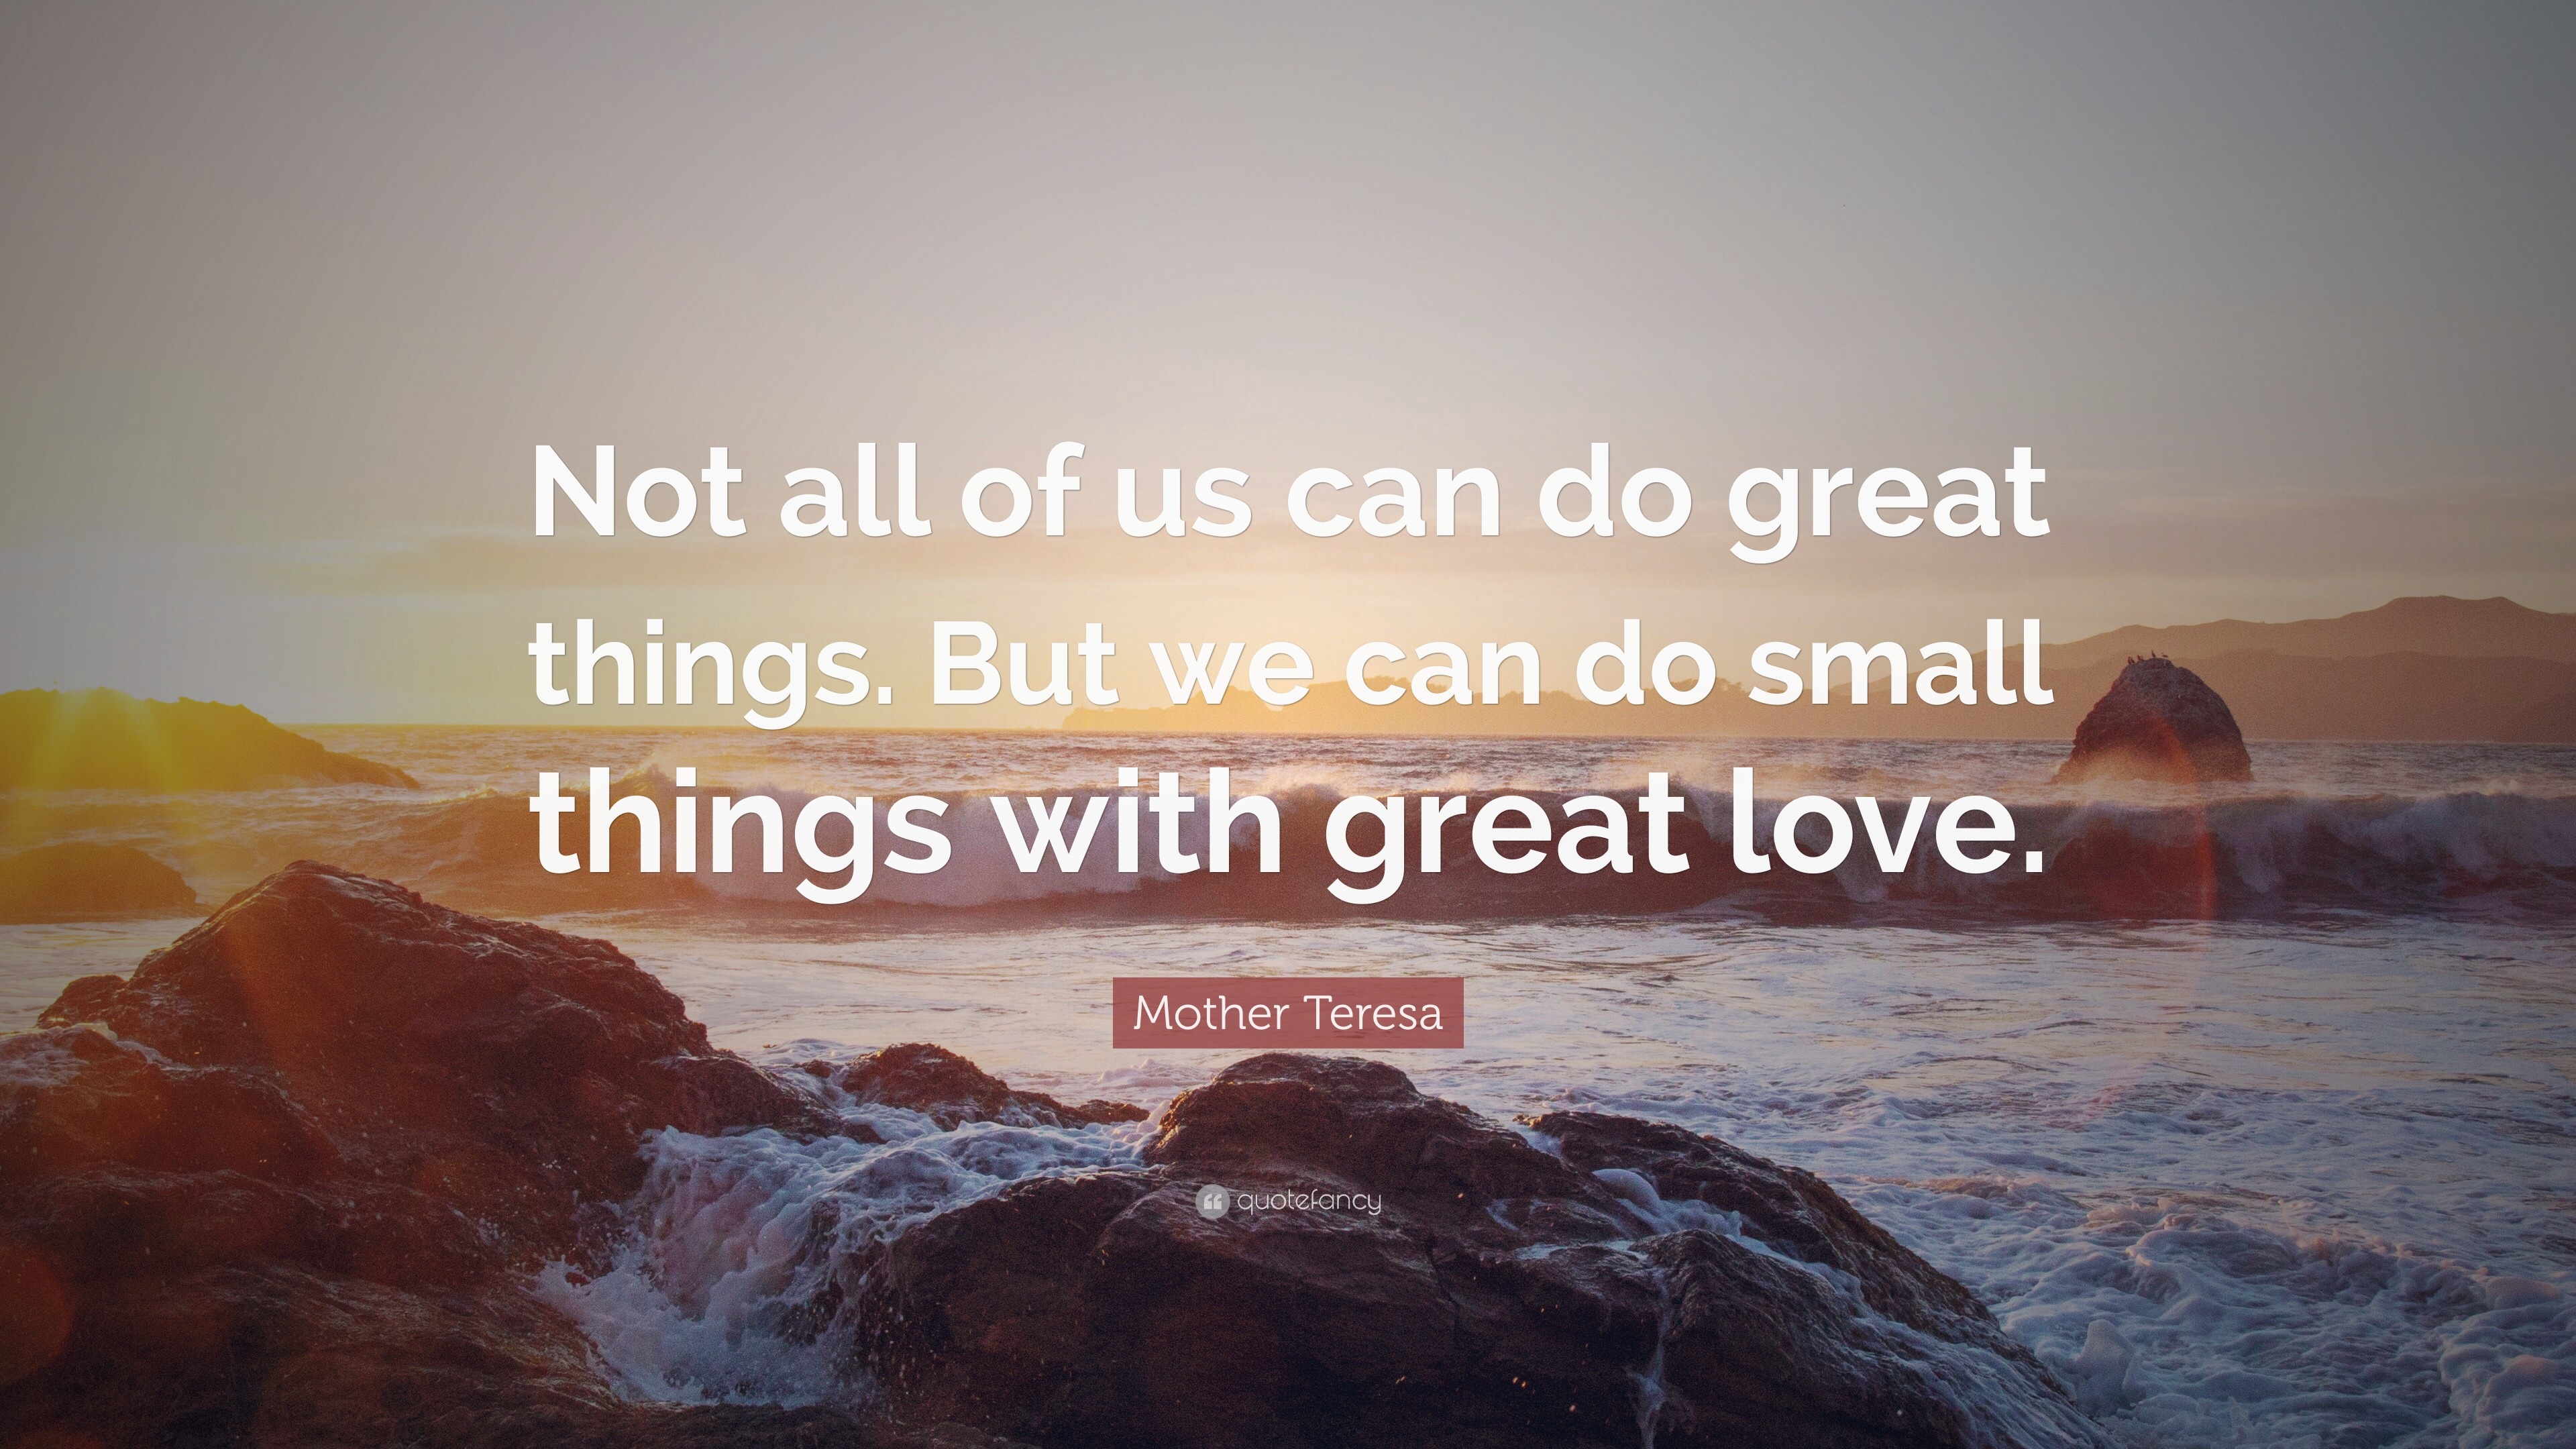 Mother Teresa Quote “Not all of us can do great things But we